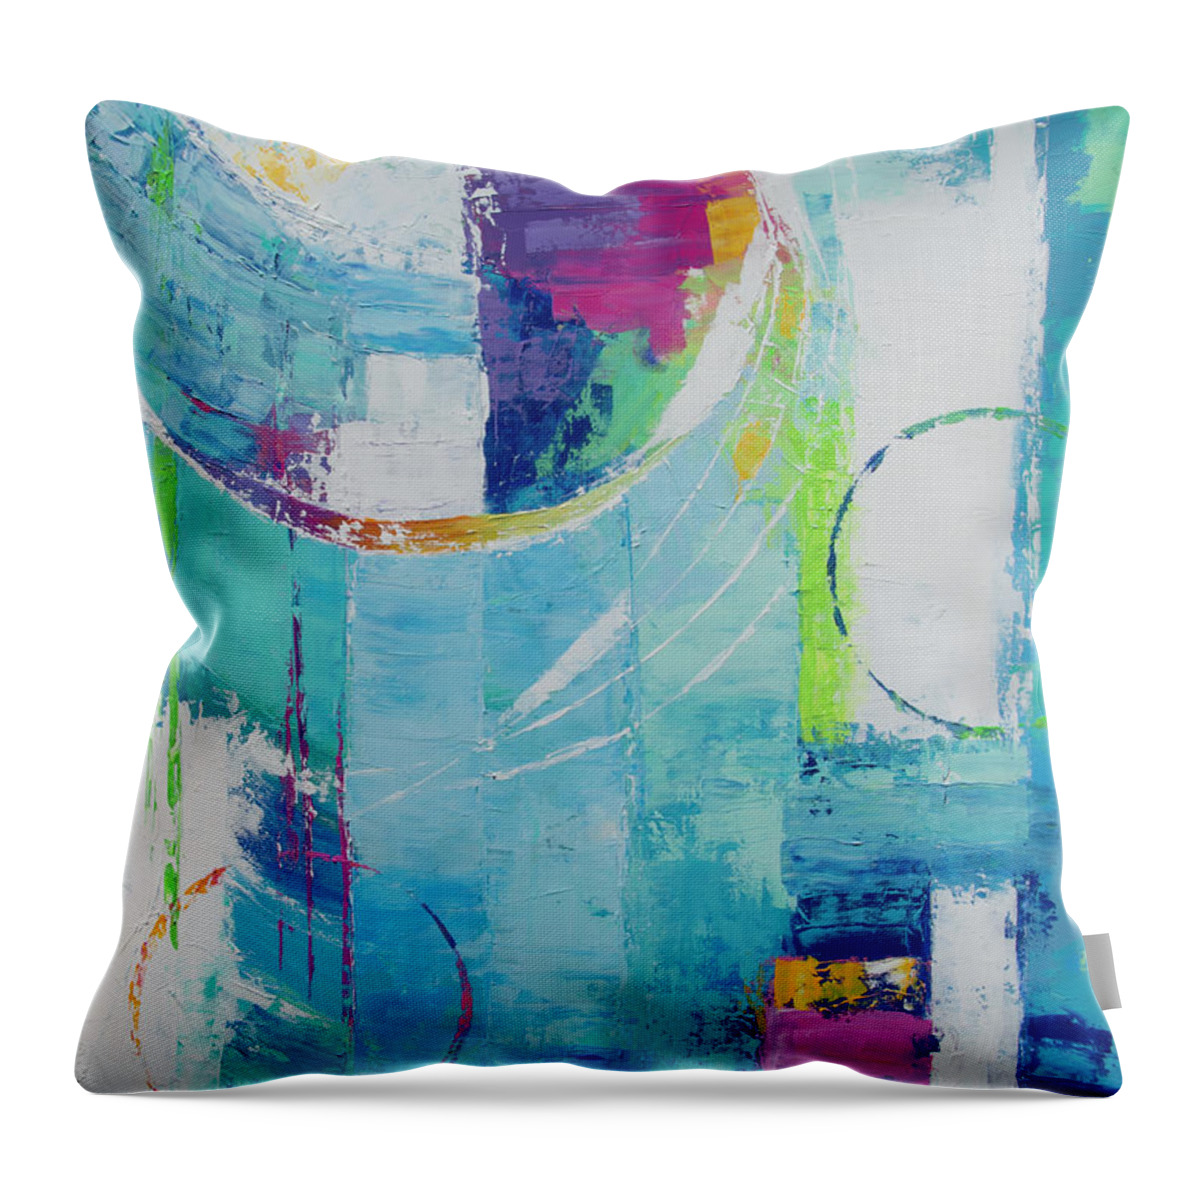 Colorful Throw Pillow featuring the painting Spinning Into Control by Linda Bailey